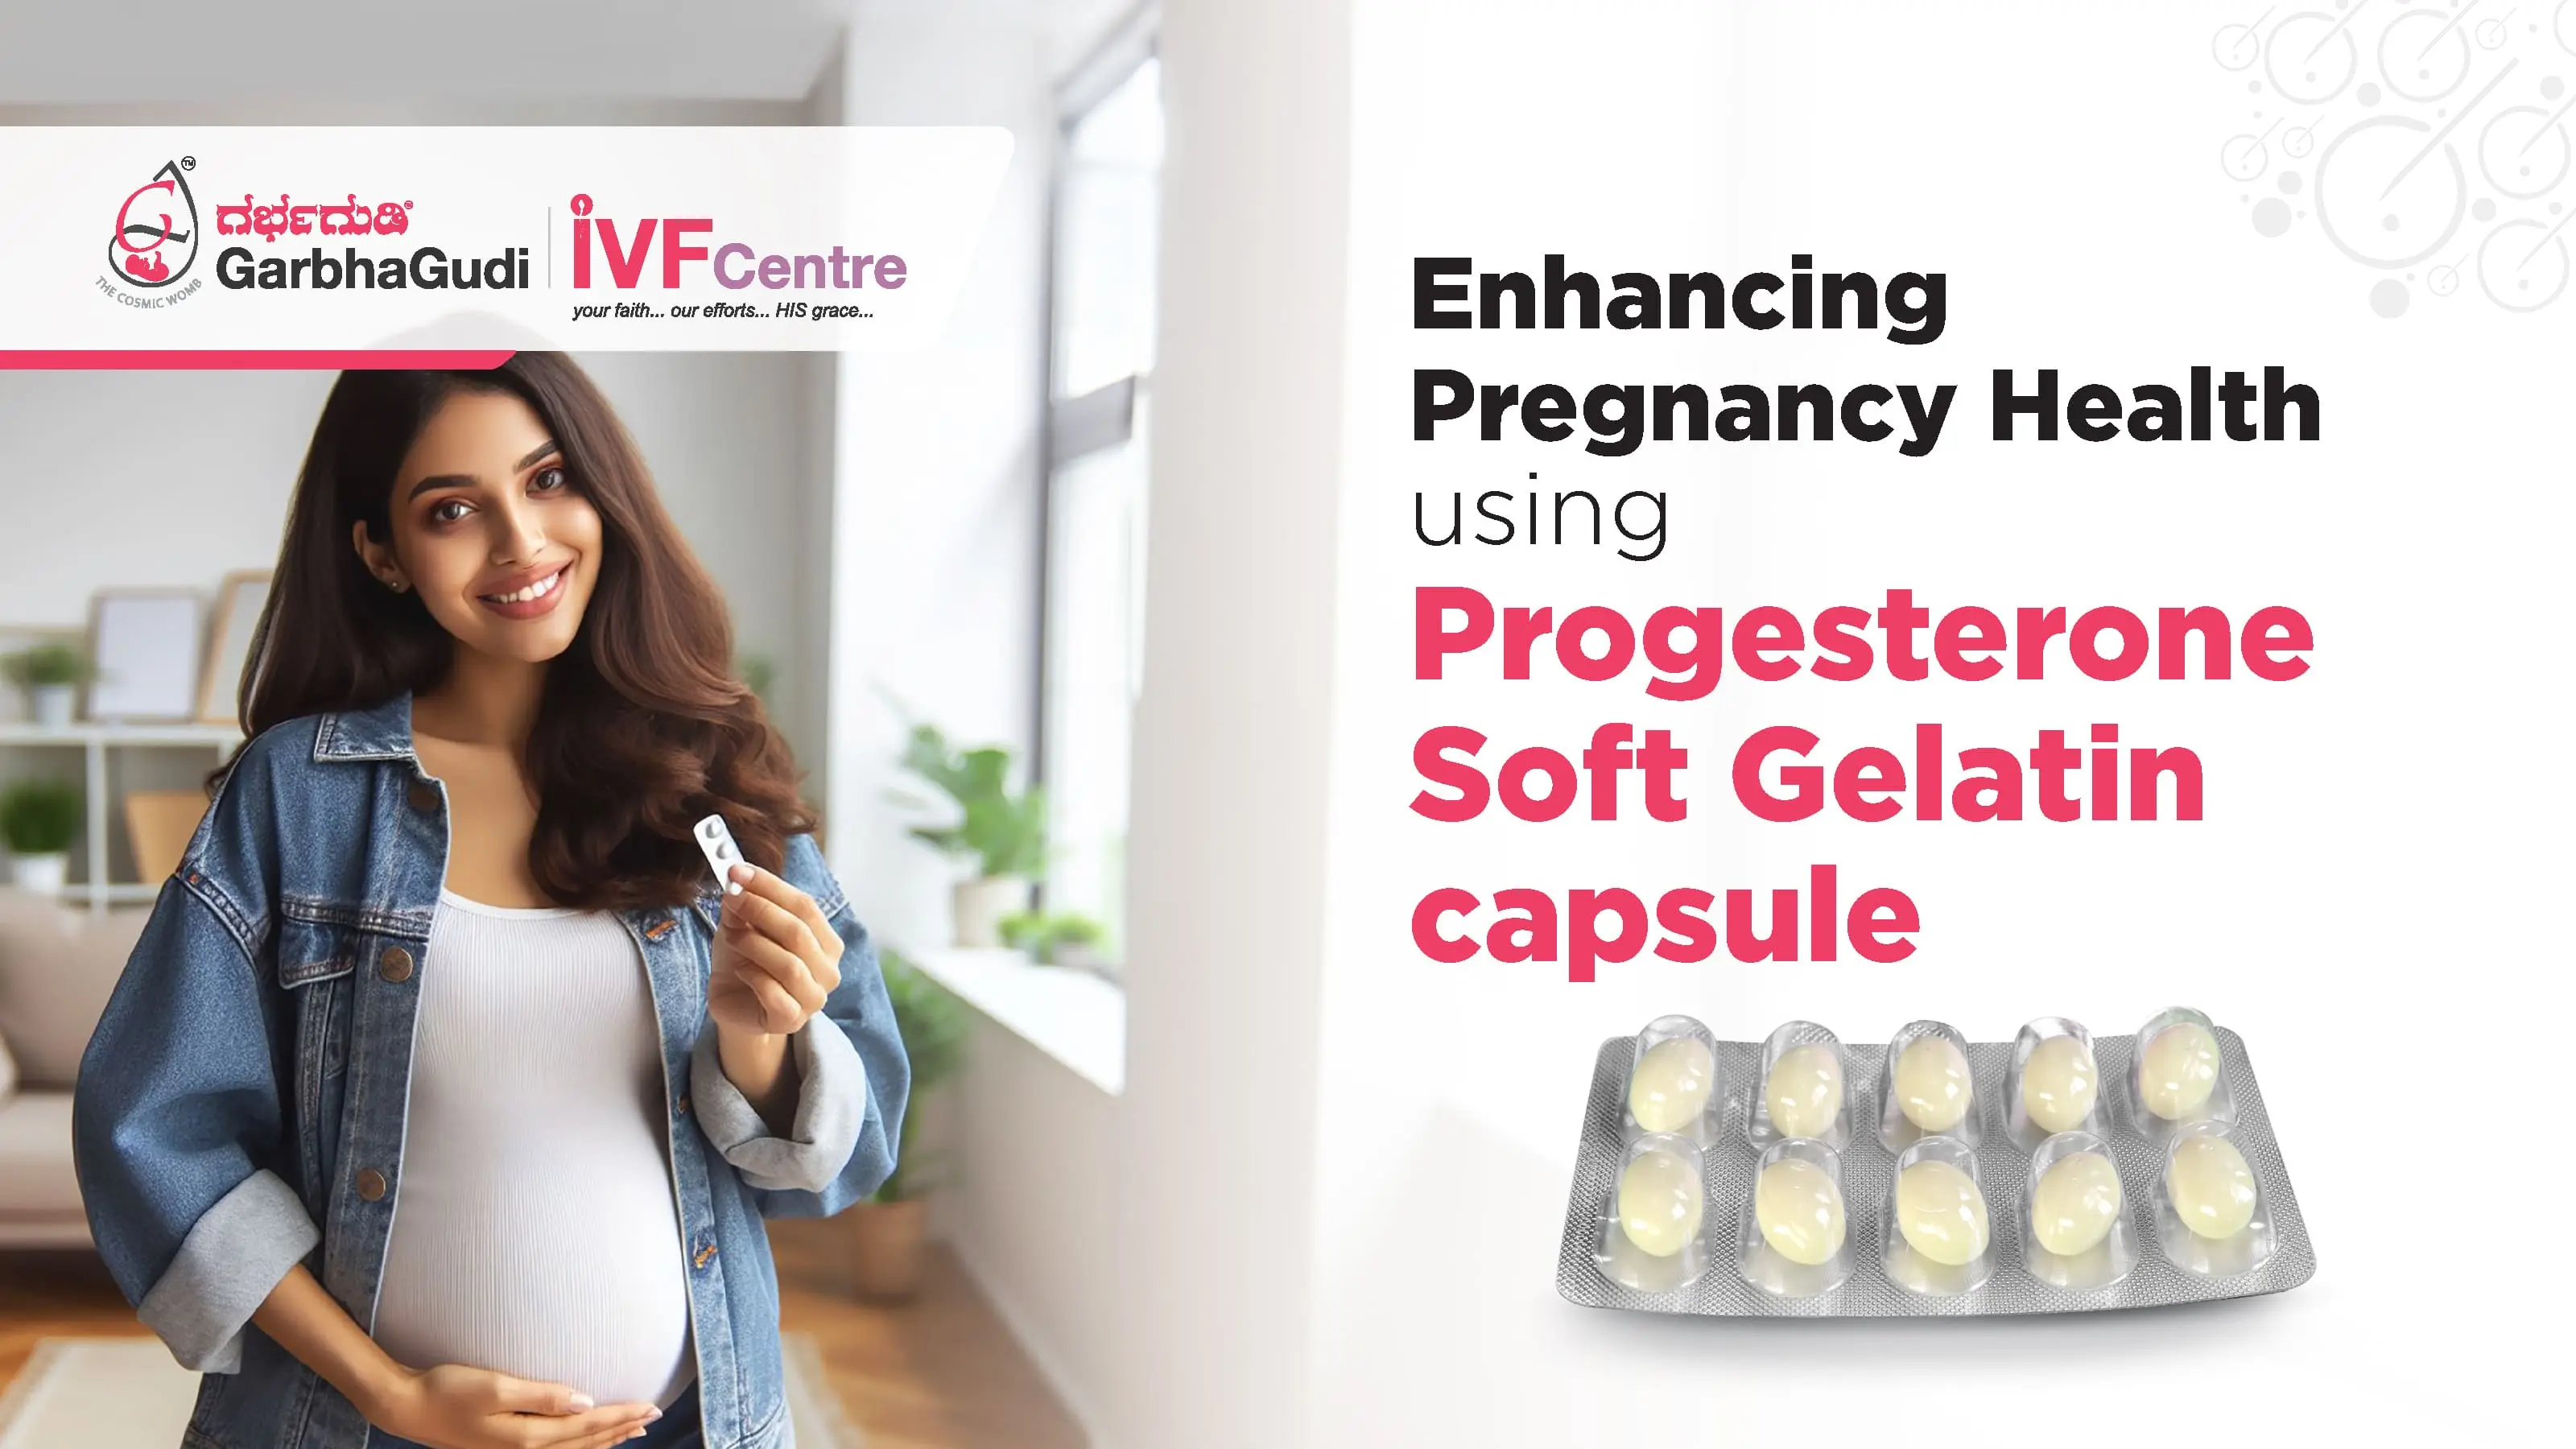 Optimize Pregnancy Health: Understand the benefits of Progesterone Soft Gelatine Capsules